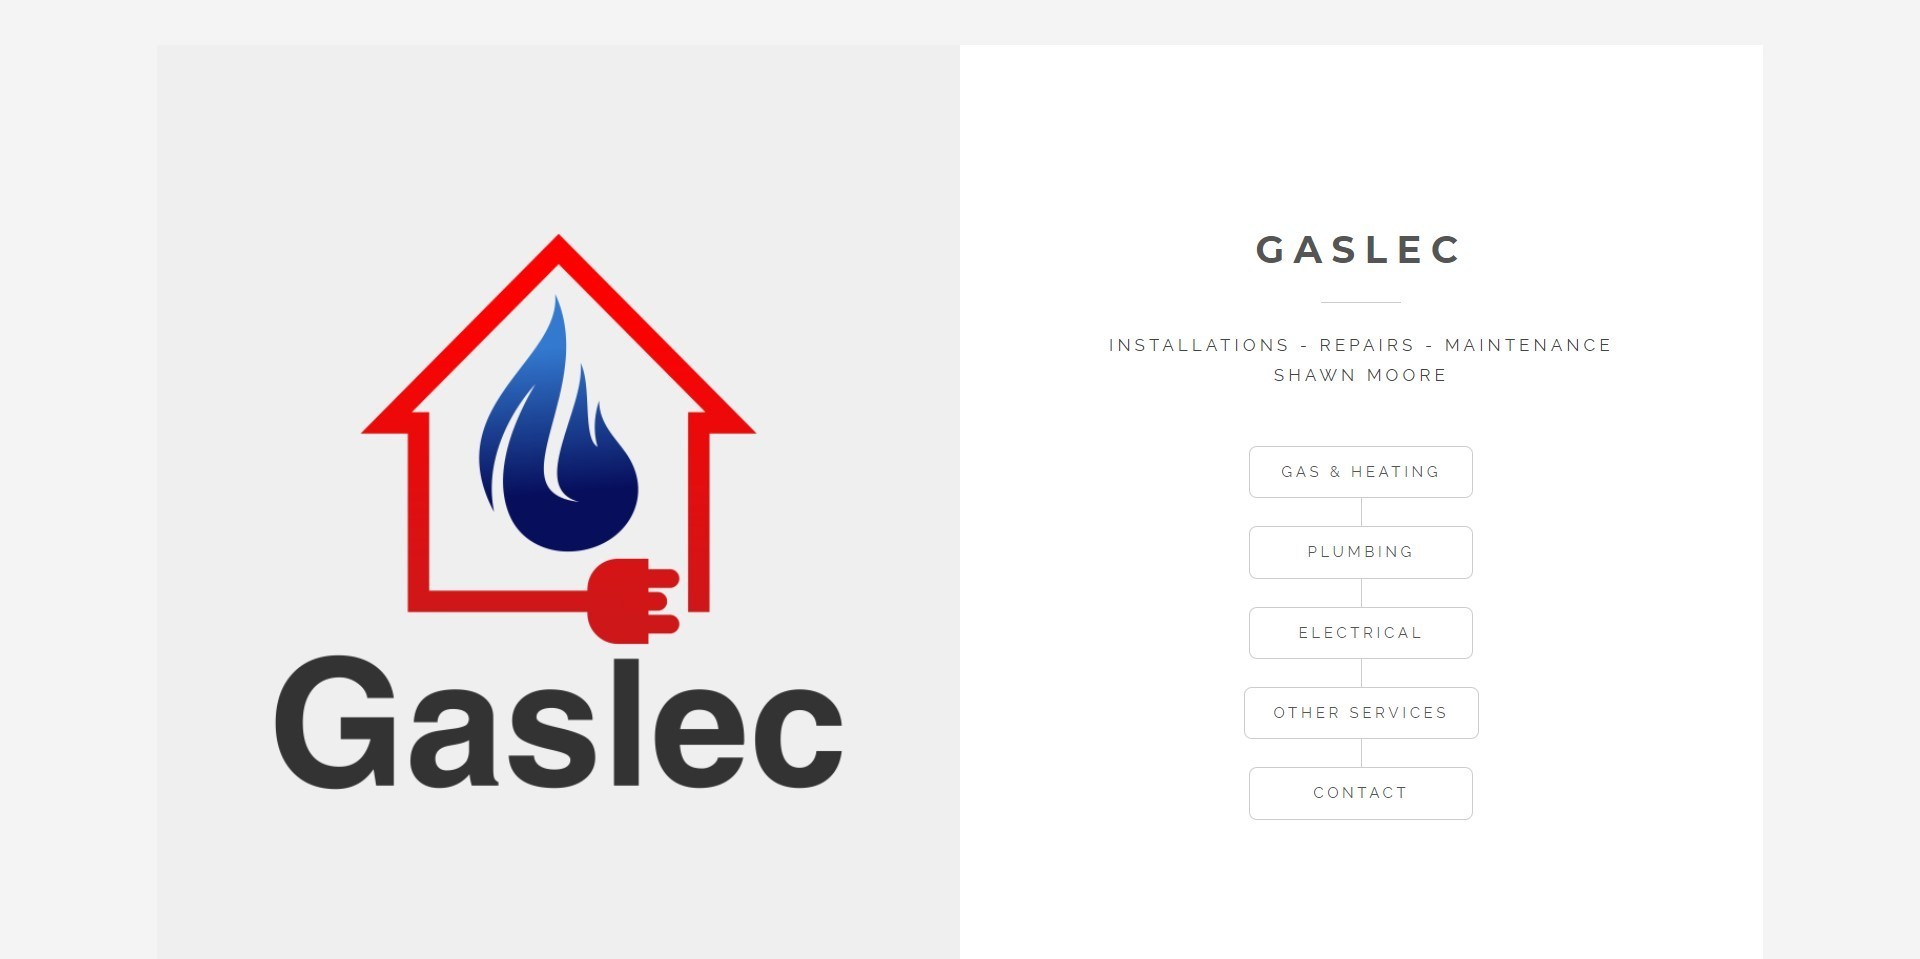 The previous Gaslec property, designed by it'seeze, website shown on desktop